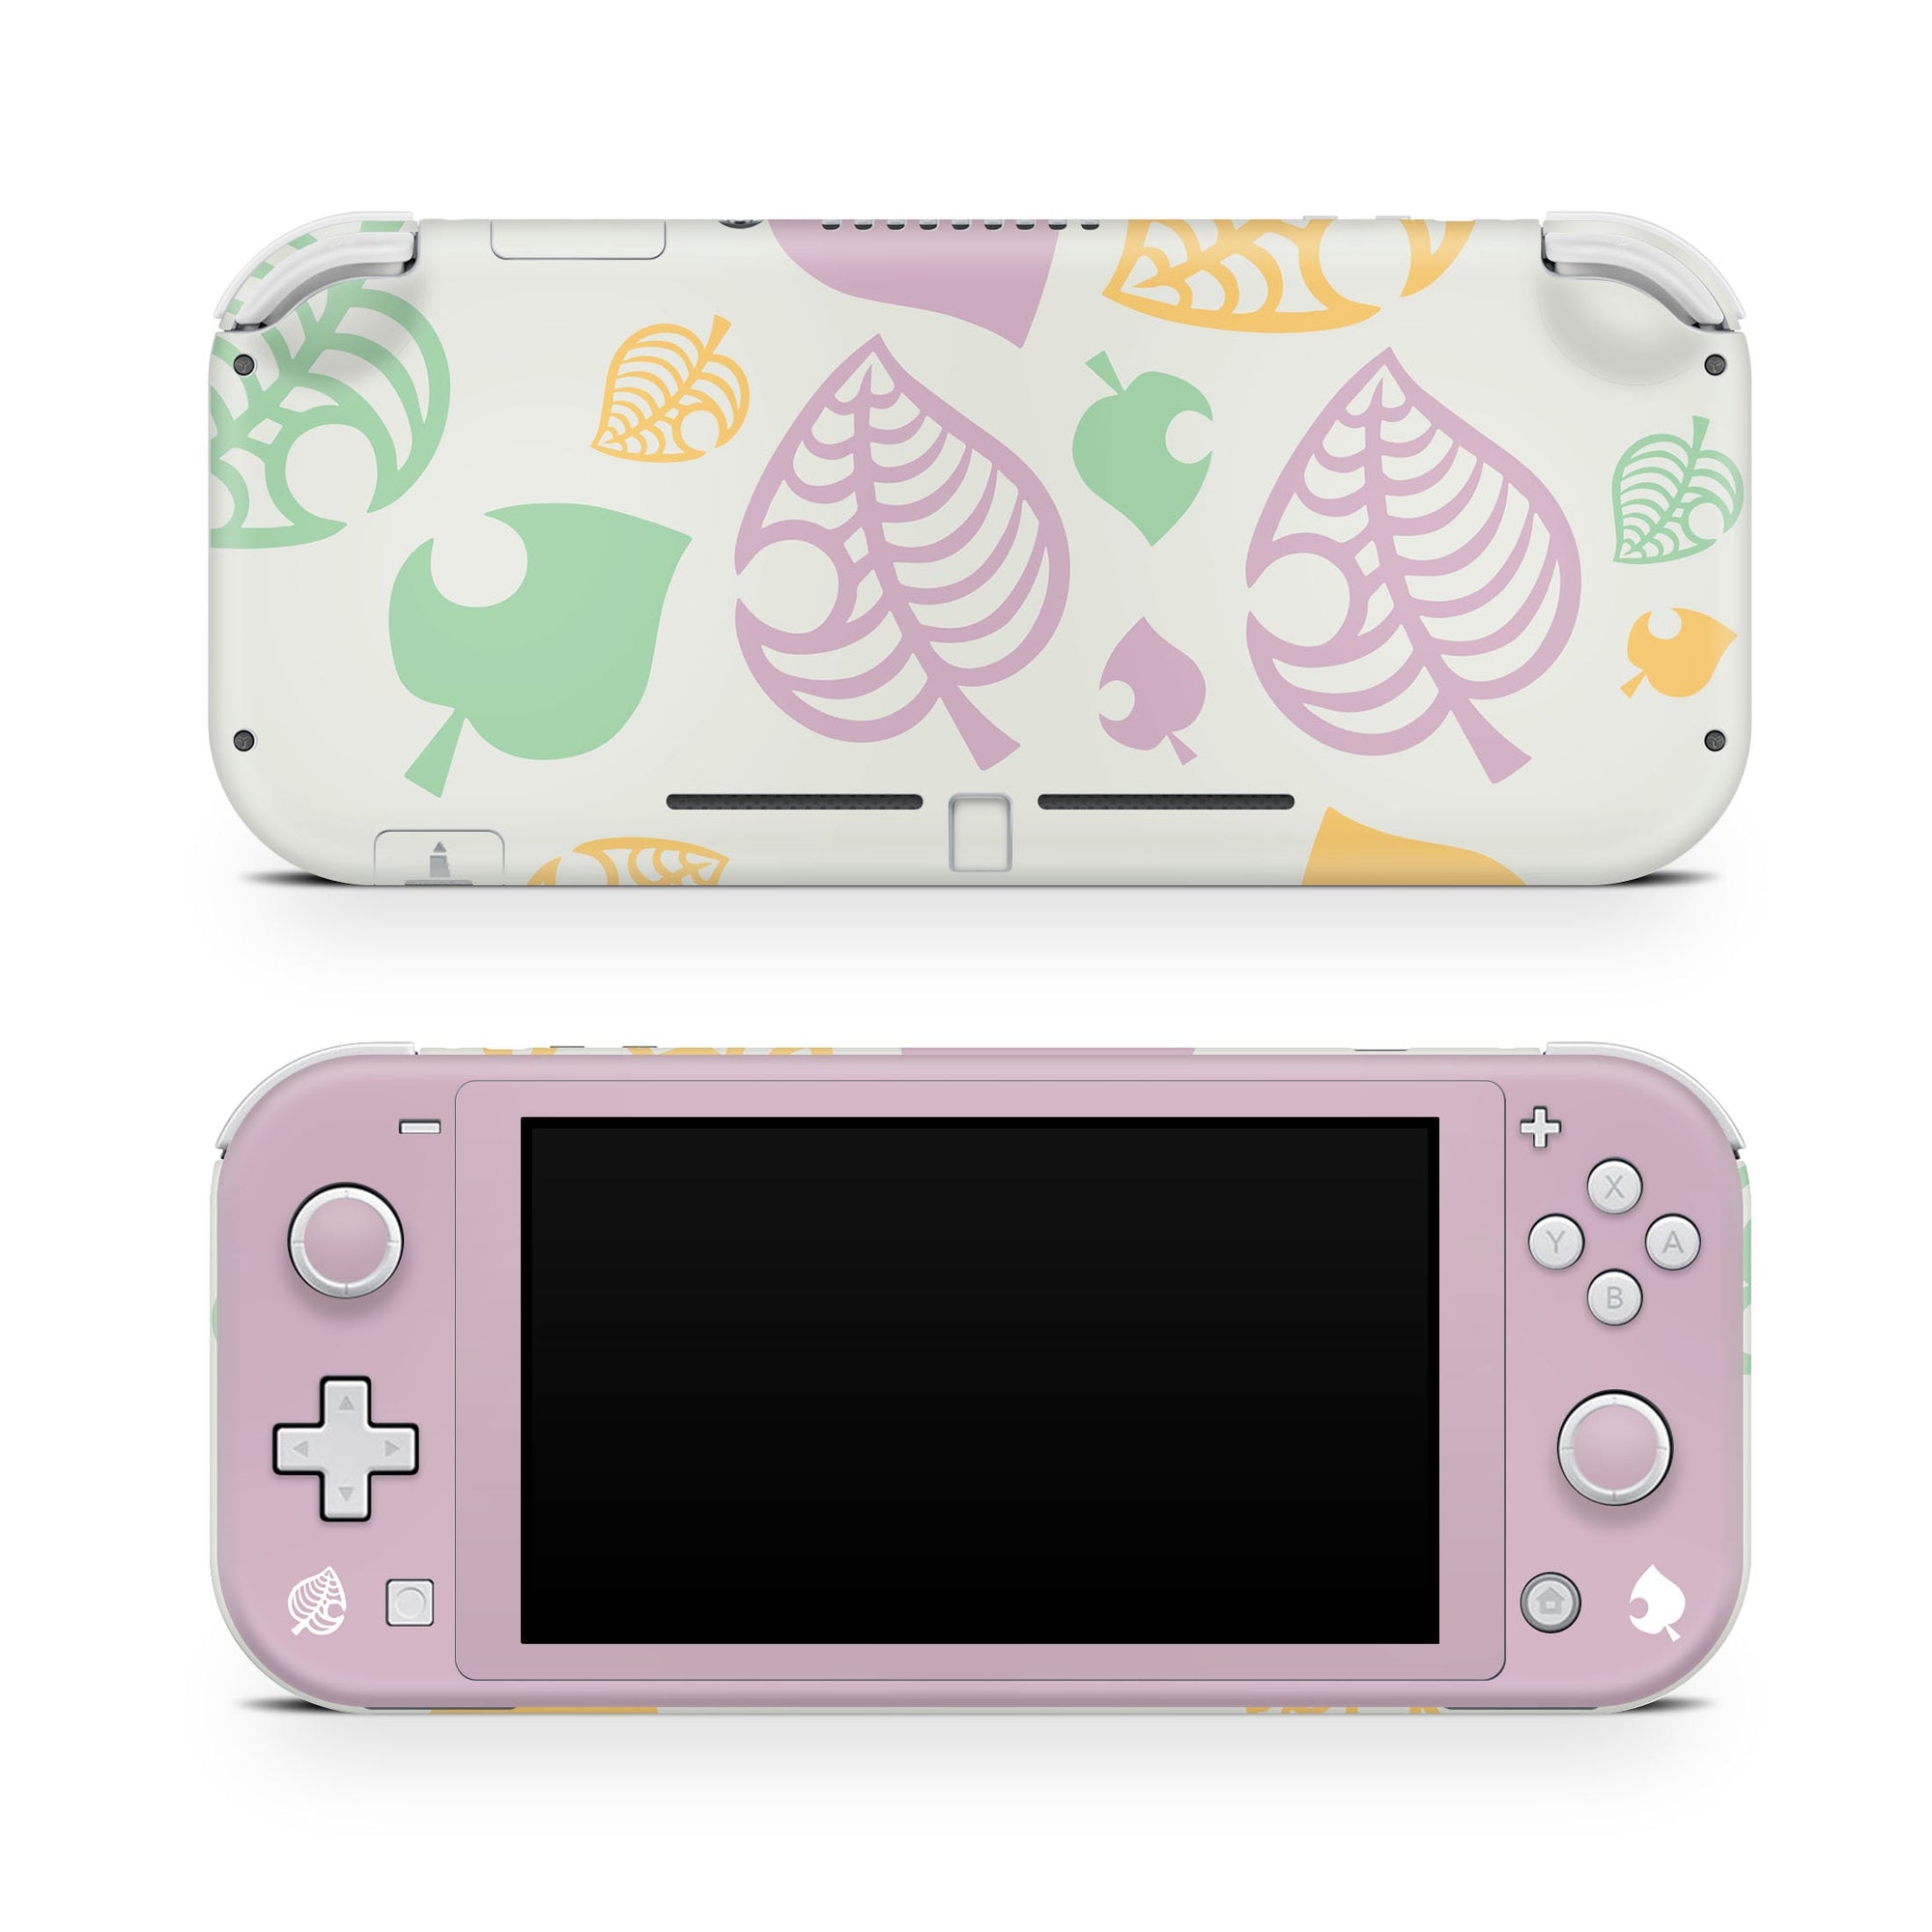 Nintendo switch Lite skin Leaf, Leave Switches lite skin Pastel Full wrap Cover decal Vinyl 3m